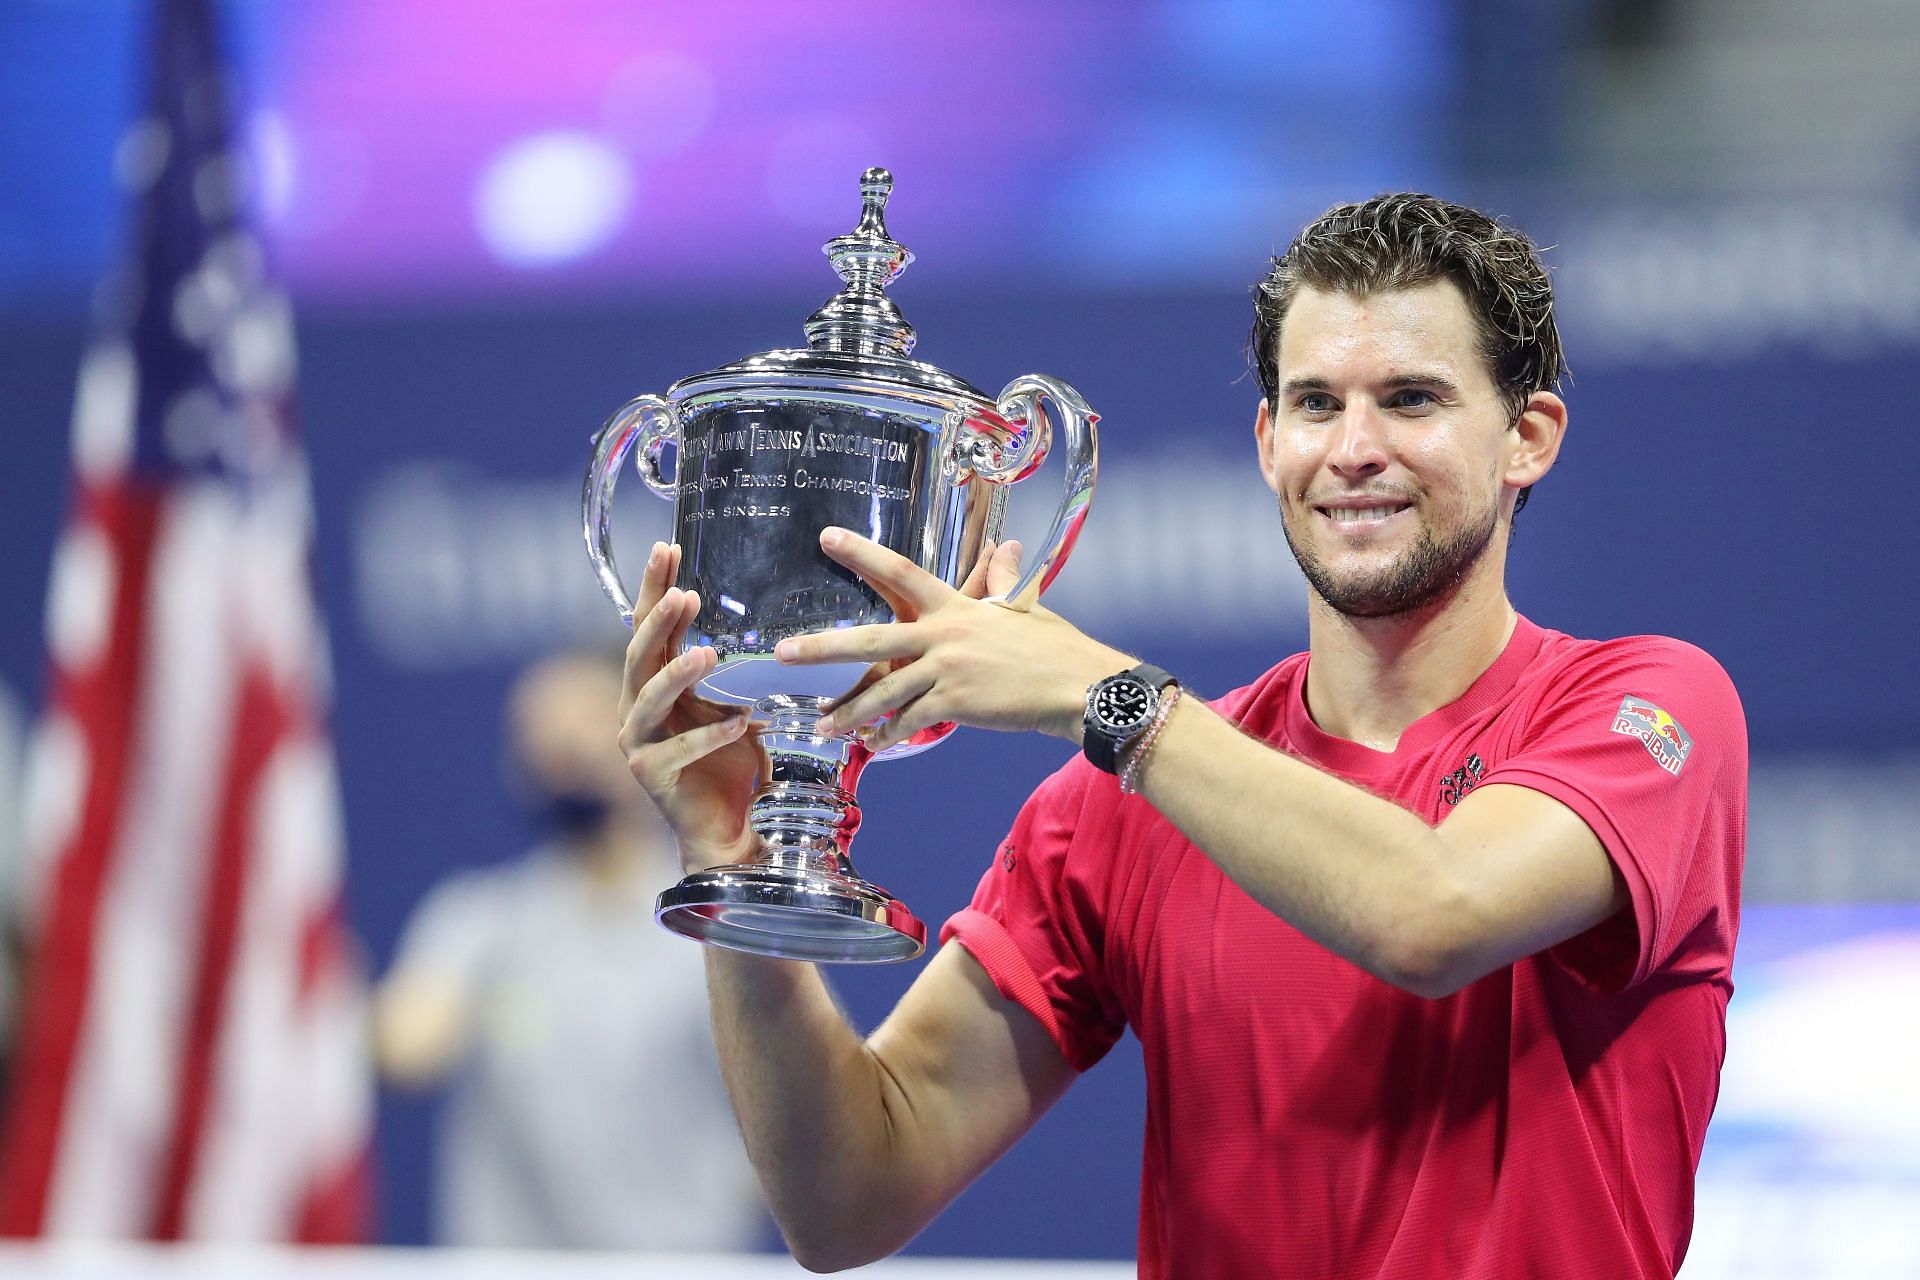 Dominic Thiem has the best record against the Big-3 among active players